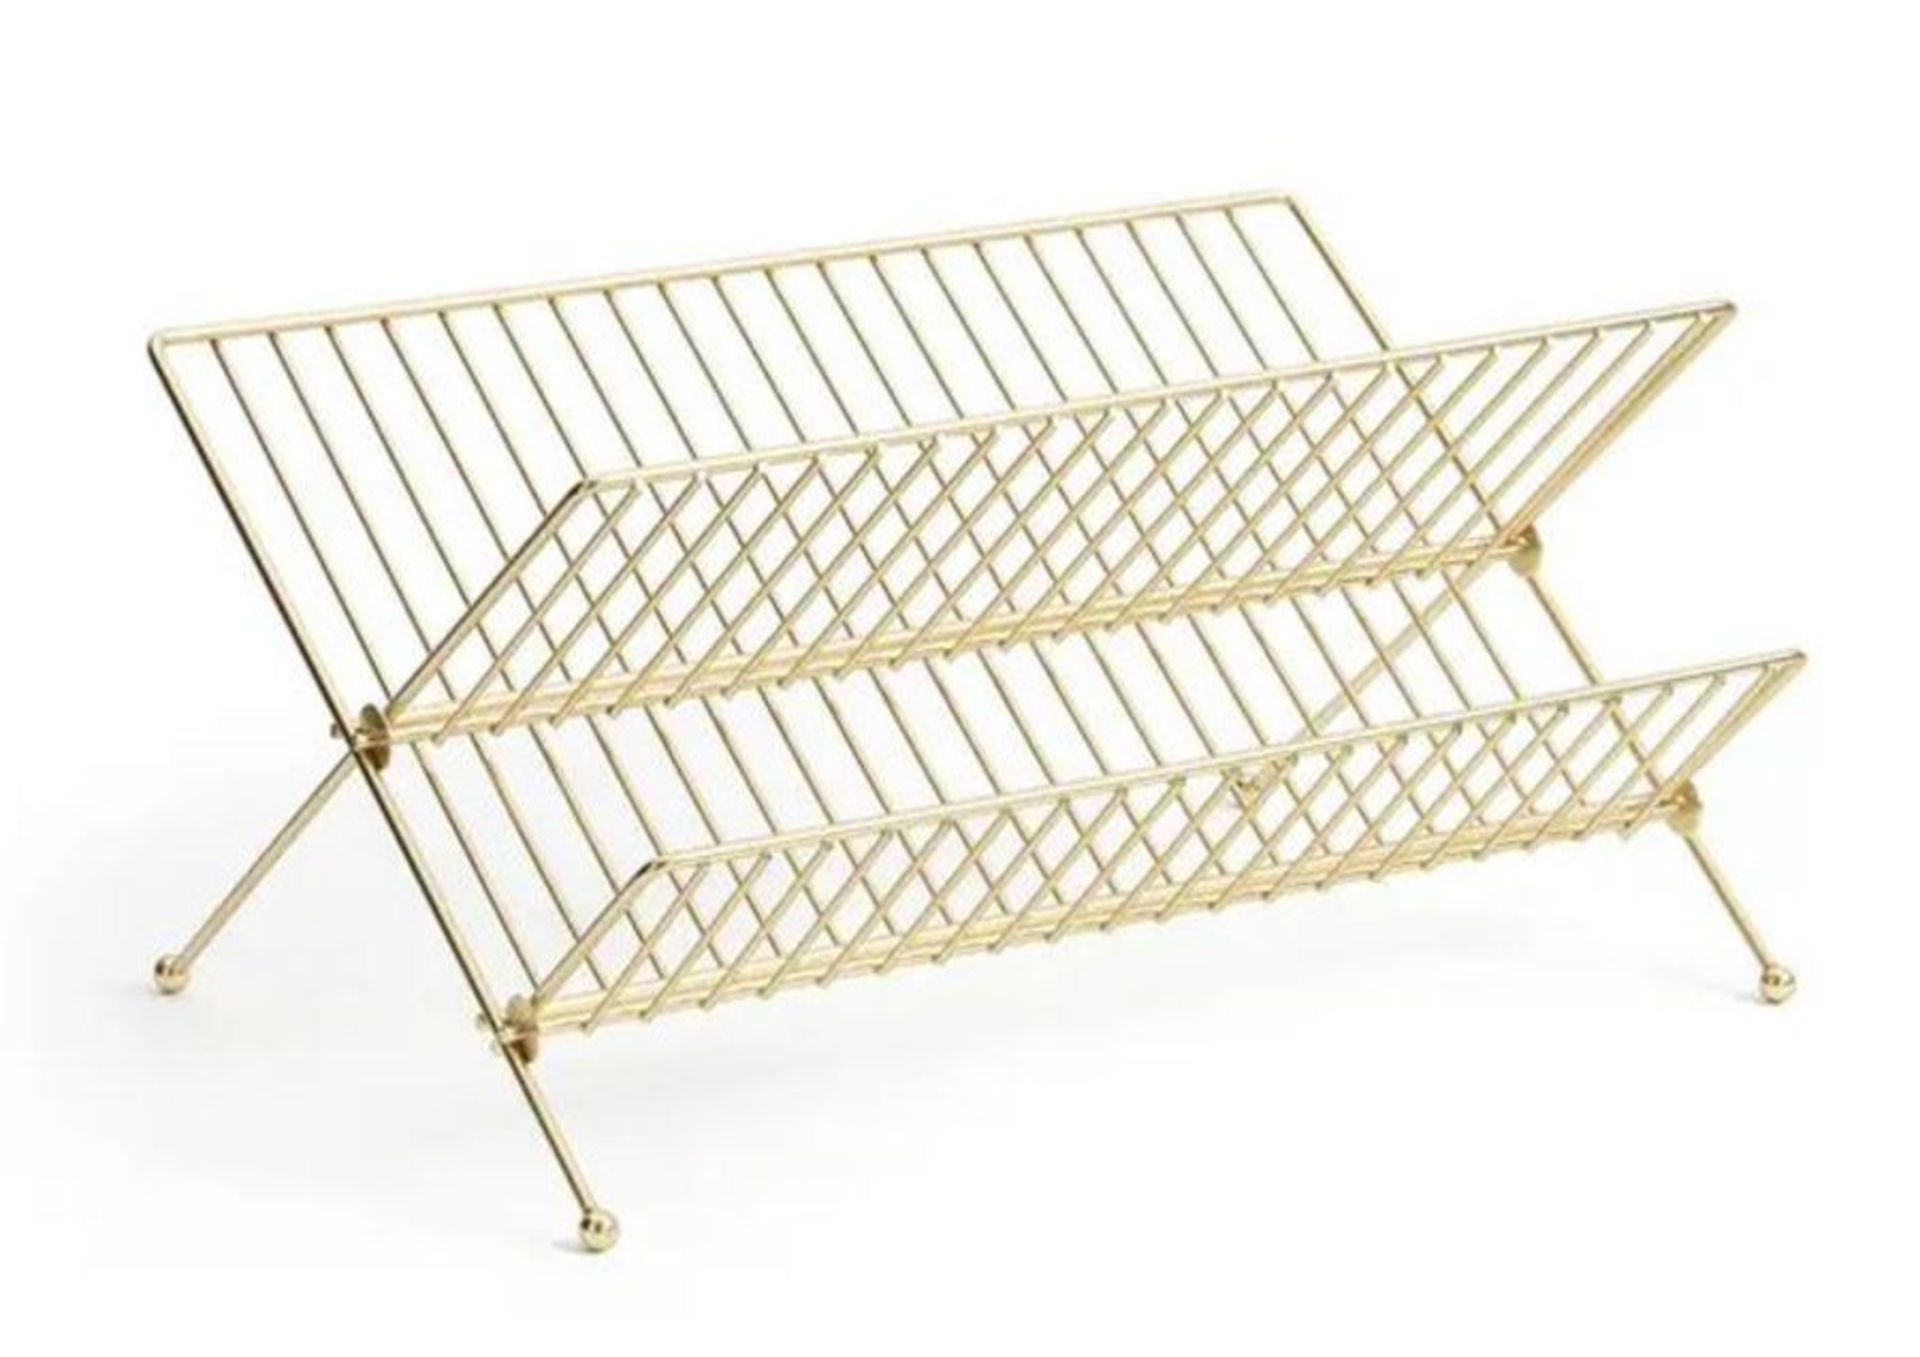 STAINLESS STEEL DRIP TRAY WITH GOLD FINISH / RRP £32.00 / CUSTOMER RETURN. GRADE A